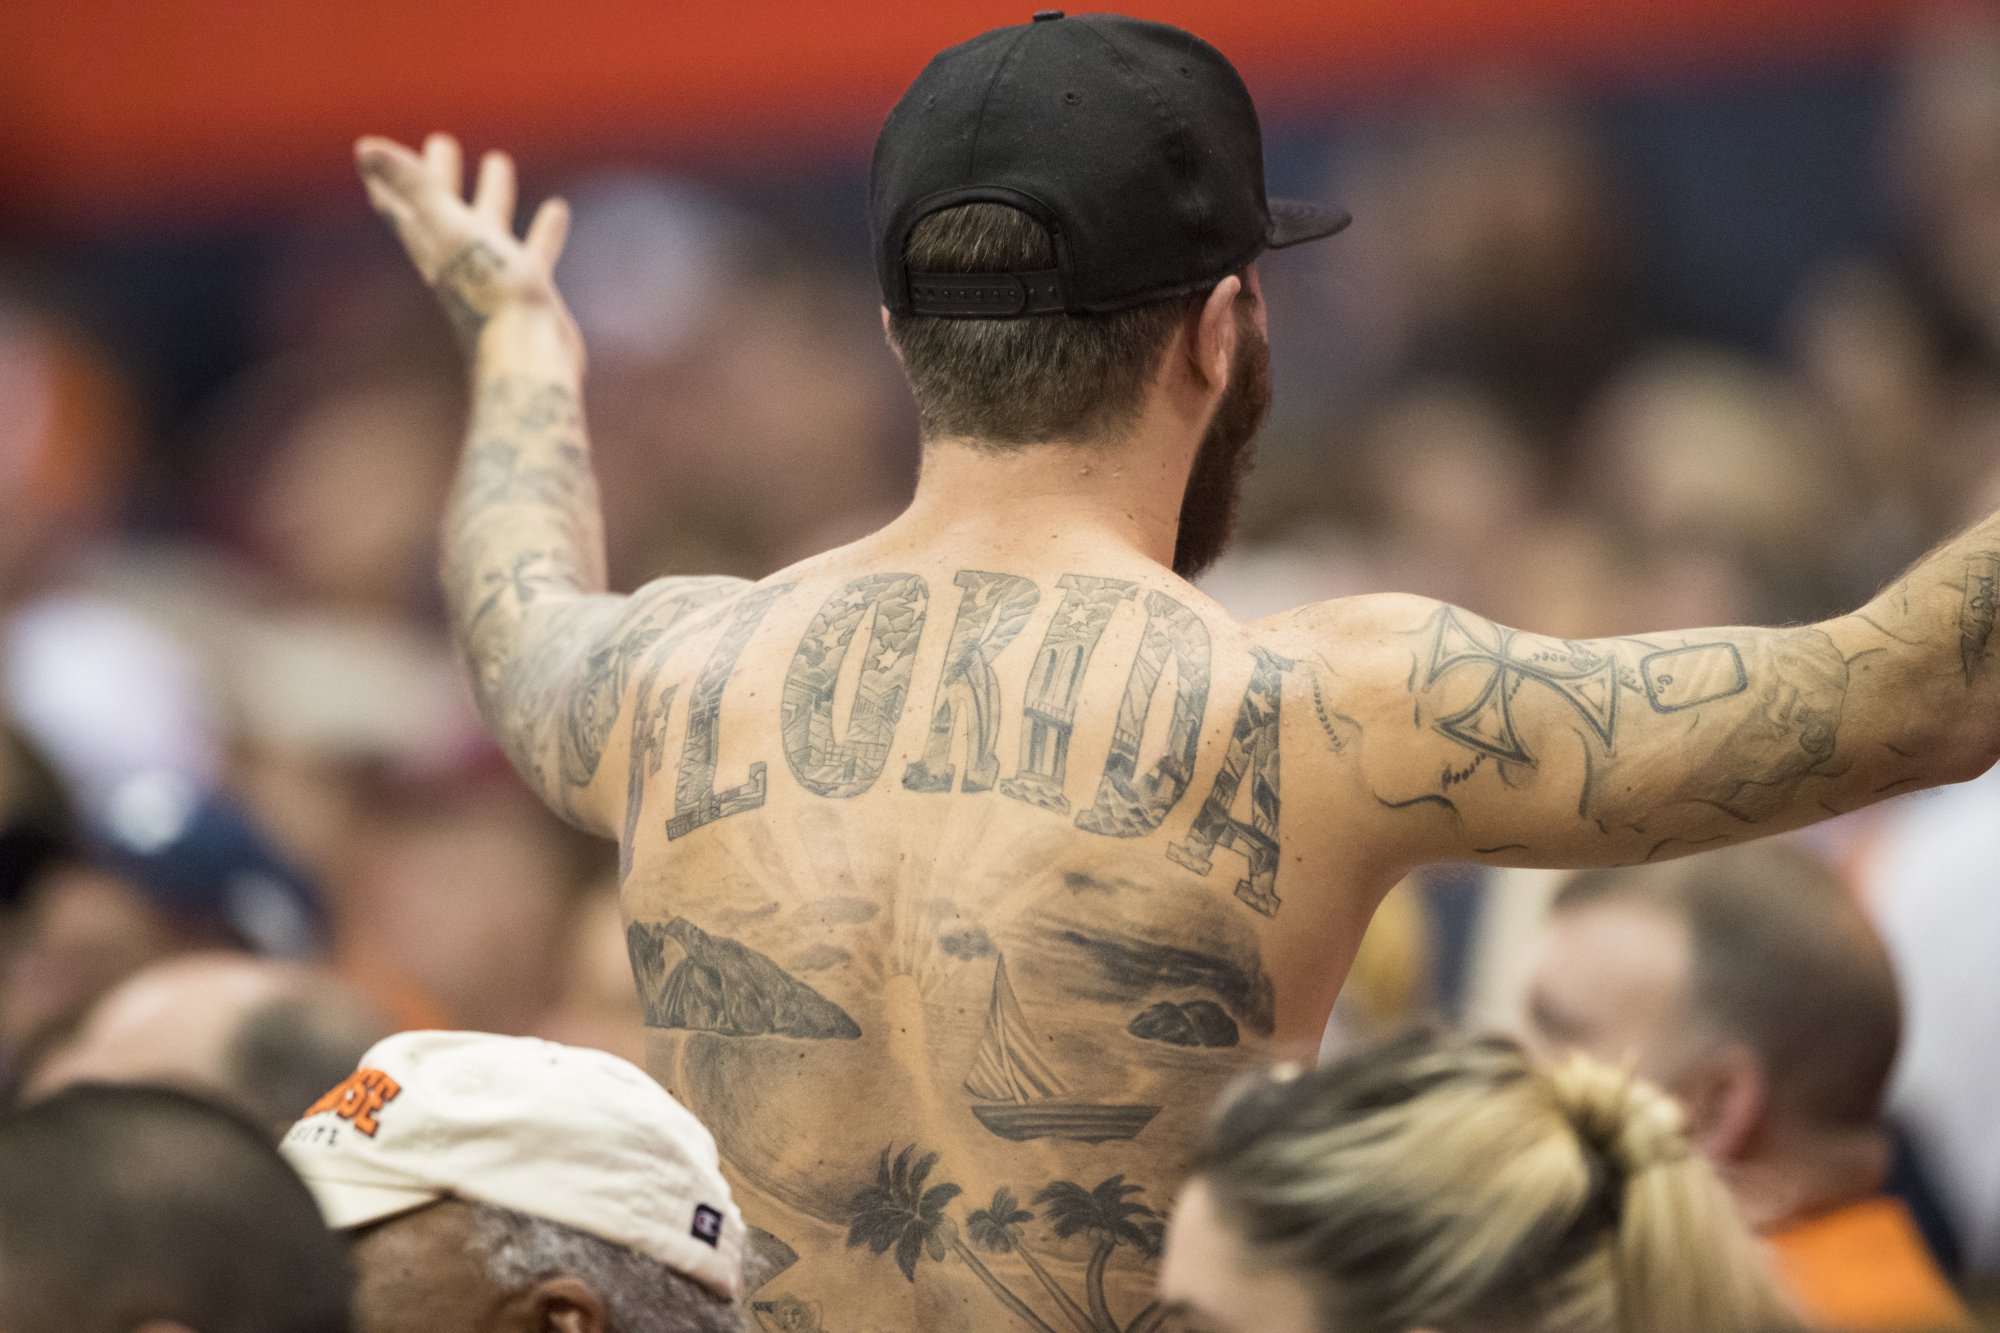 The bare back of a white man who is being held up above a crowd. The word "Florida" has been tattooed in large capital letters across his shoulder blades.